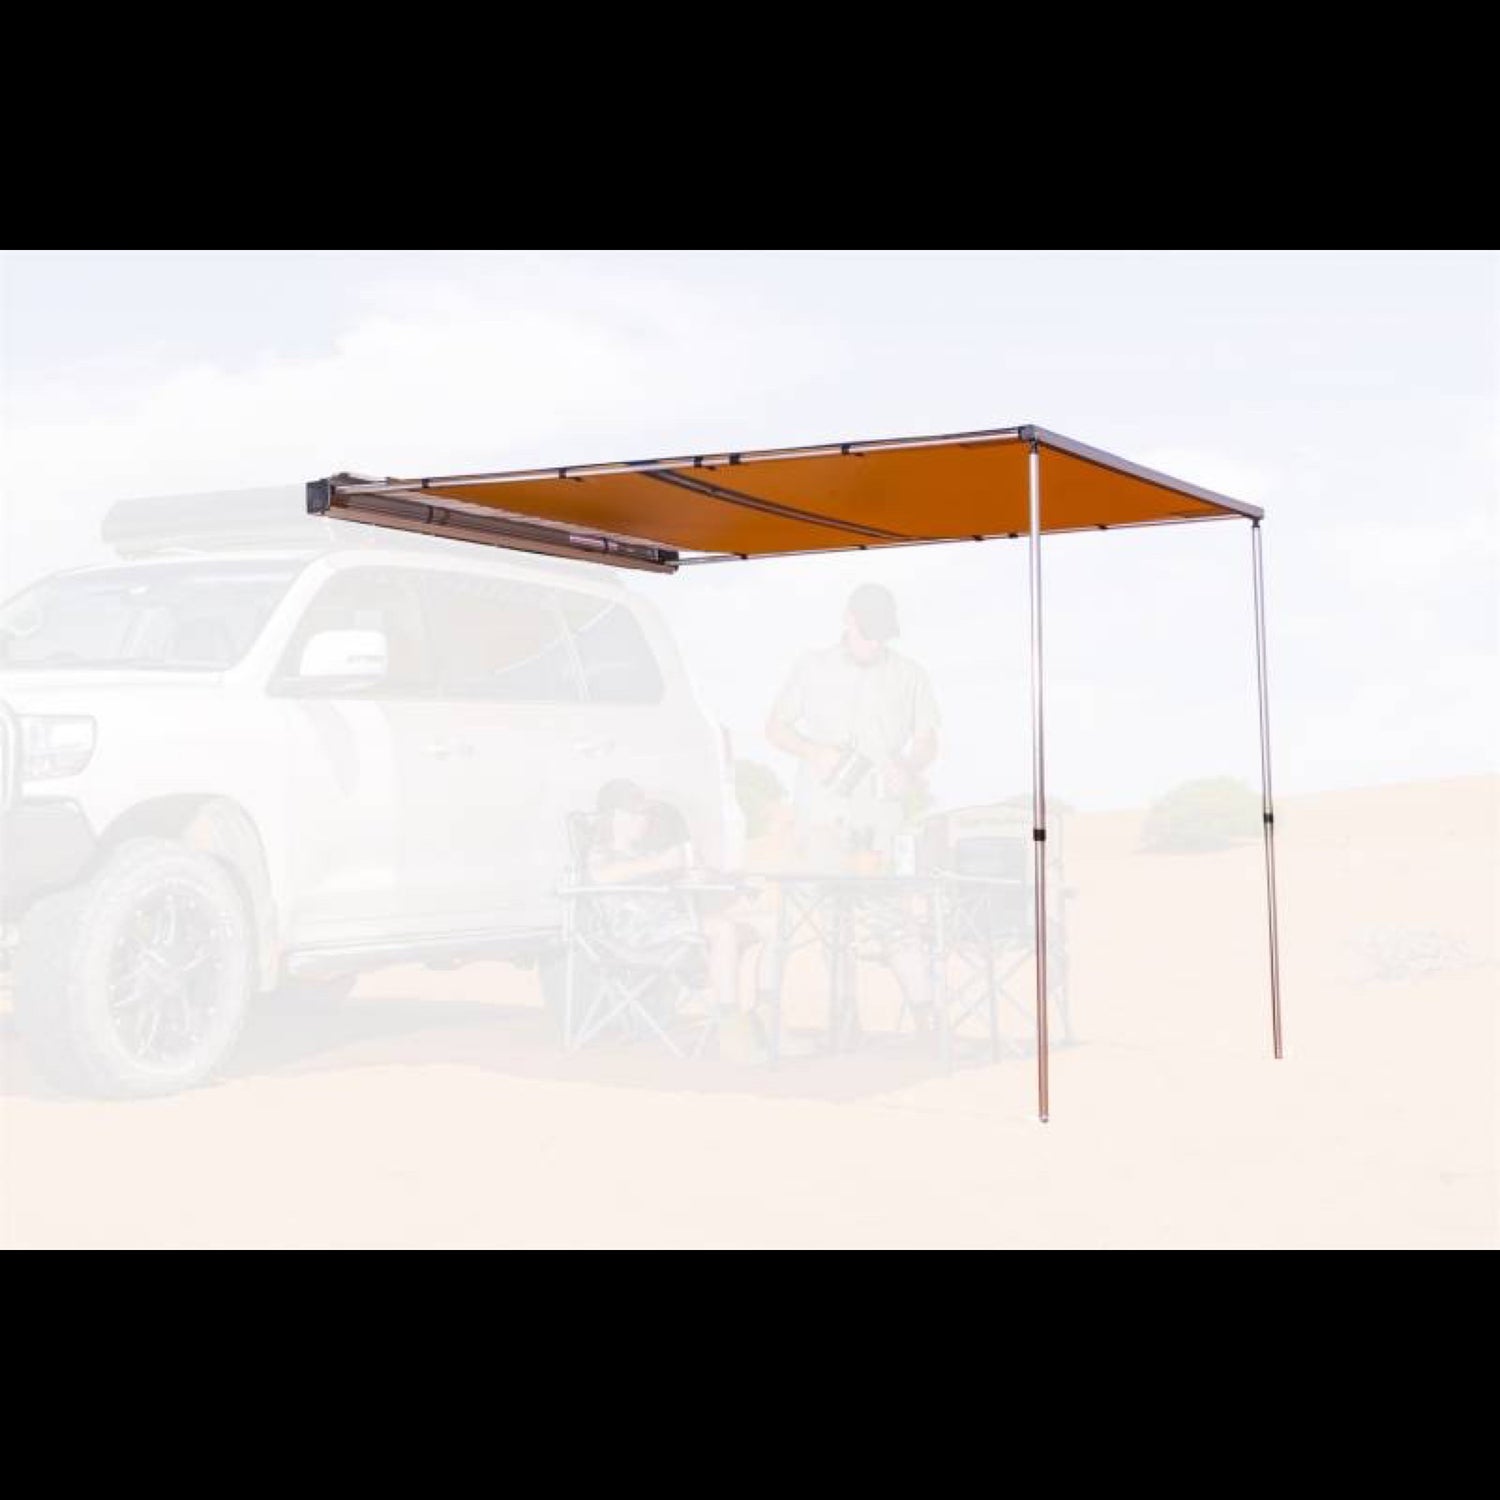 ARB 2500 Awning in tan color